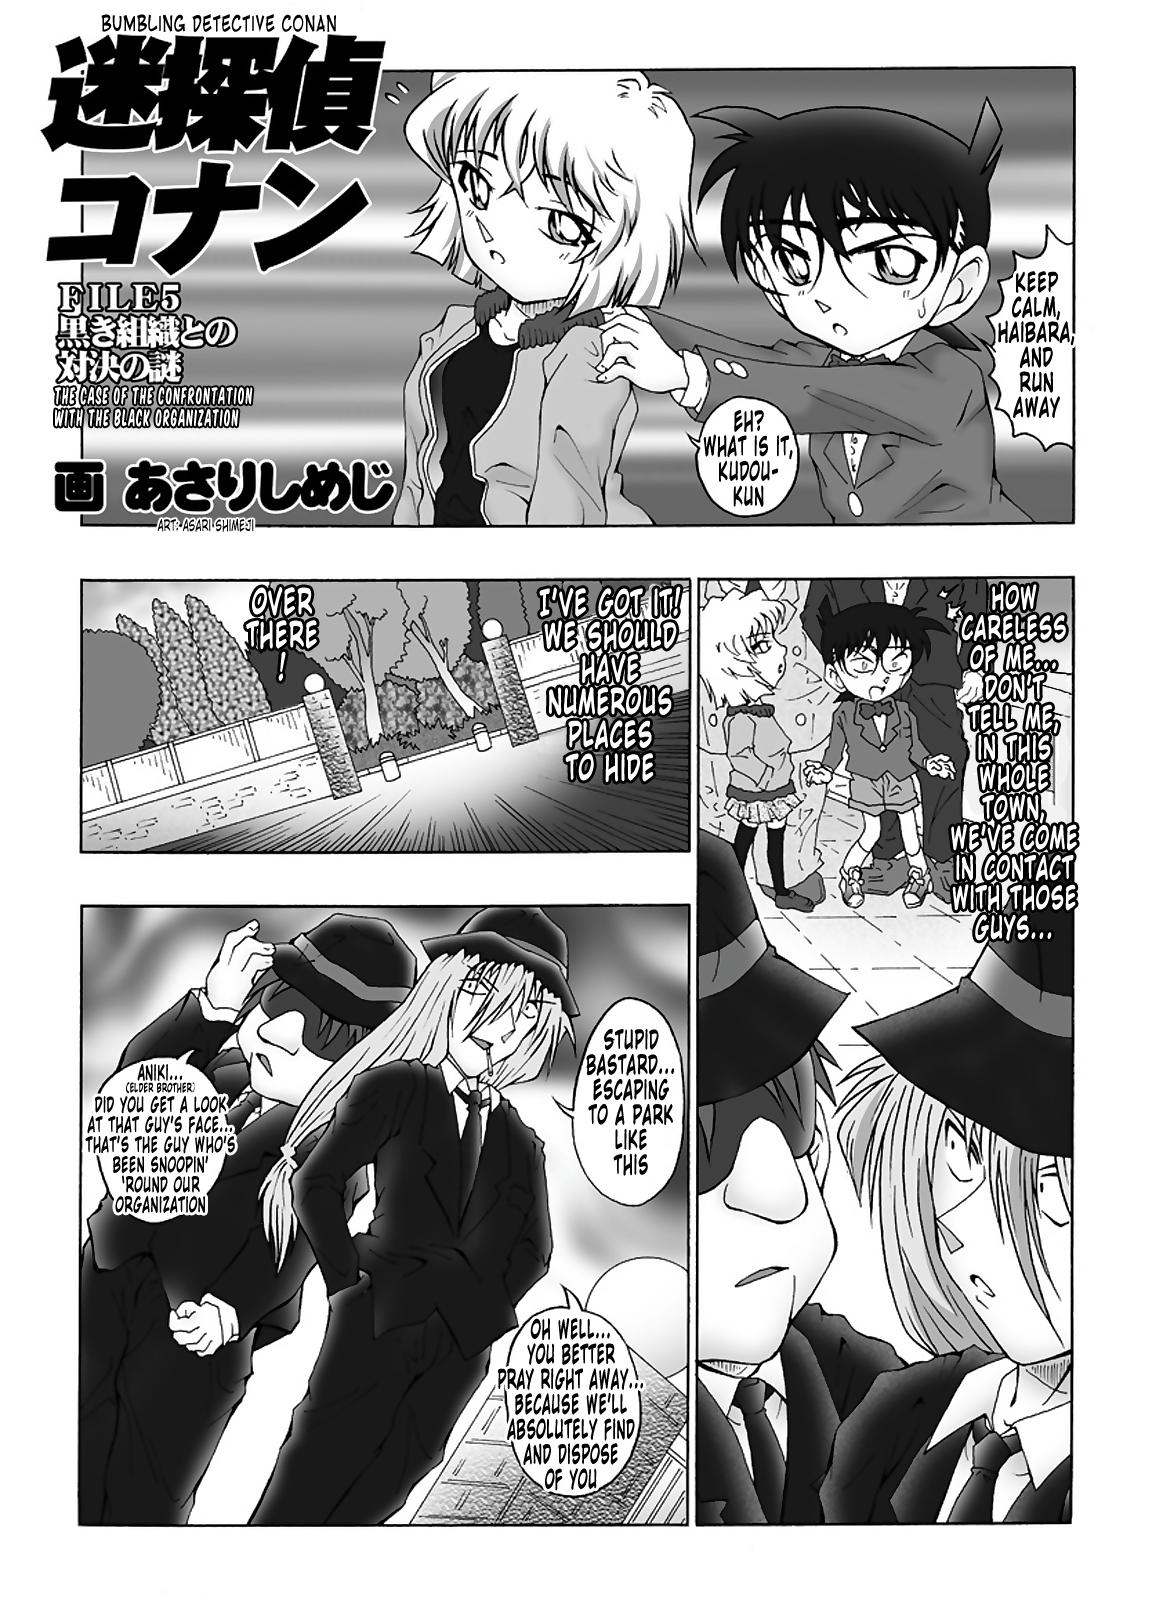 Dress Bumbling Detective Conan - File 5: The Case of The Confrontation with The Black Organiztion - Detective conan Bbw - Page 4